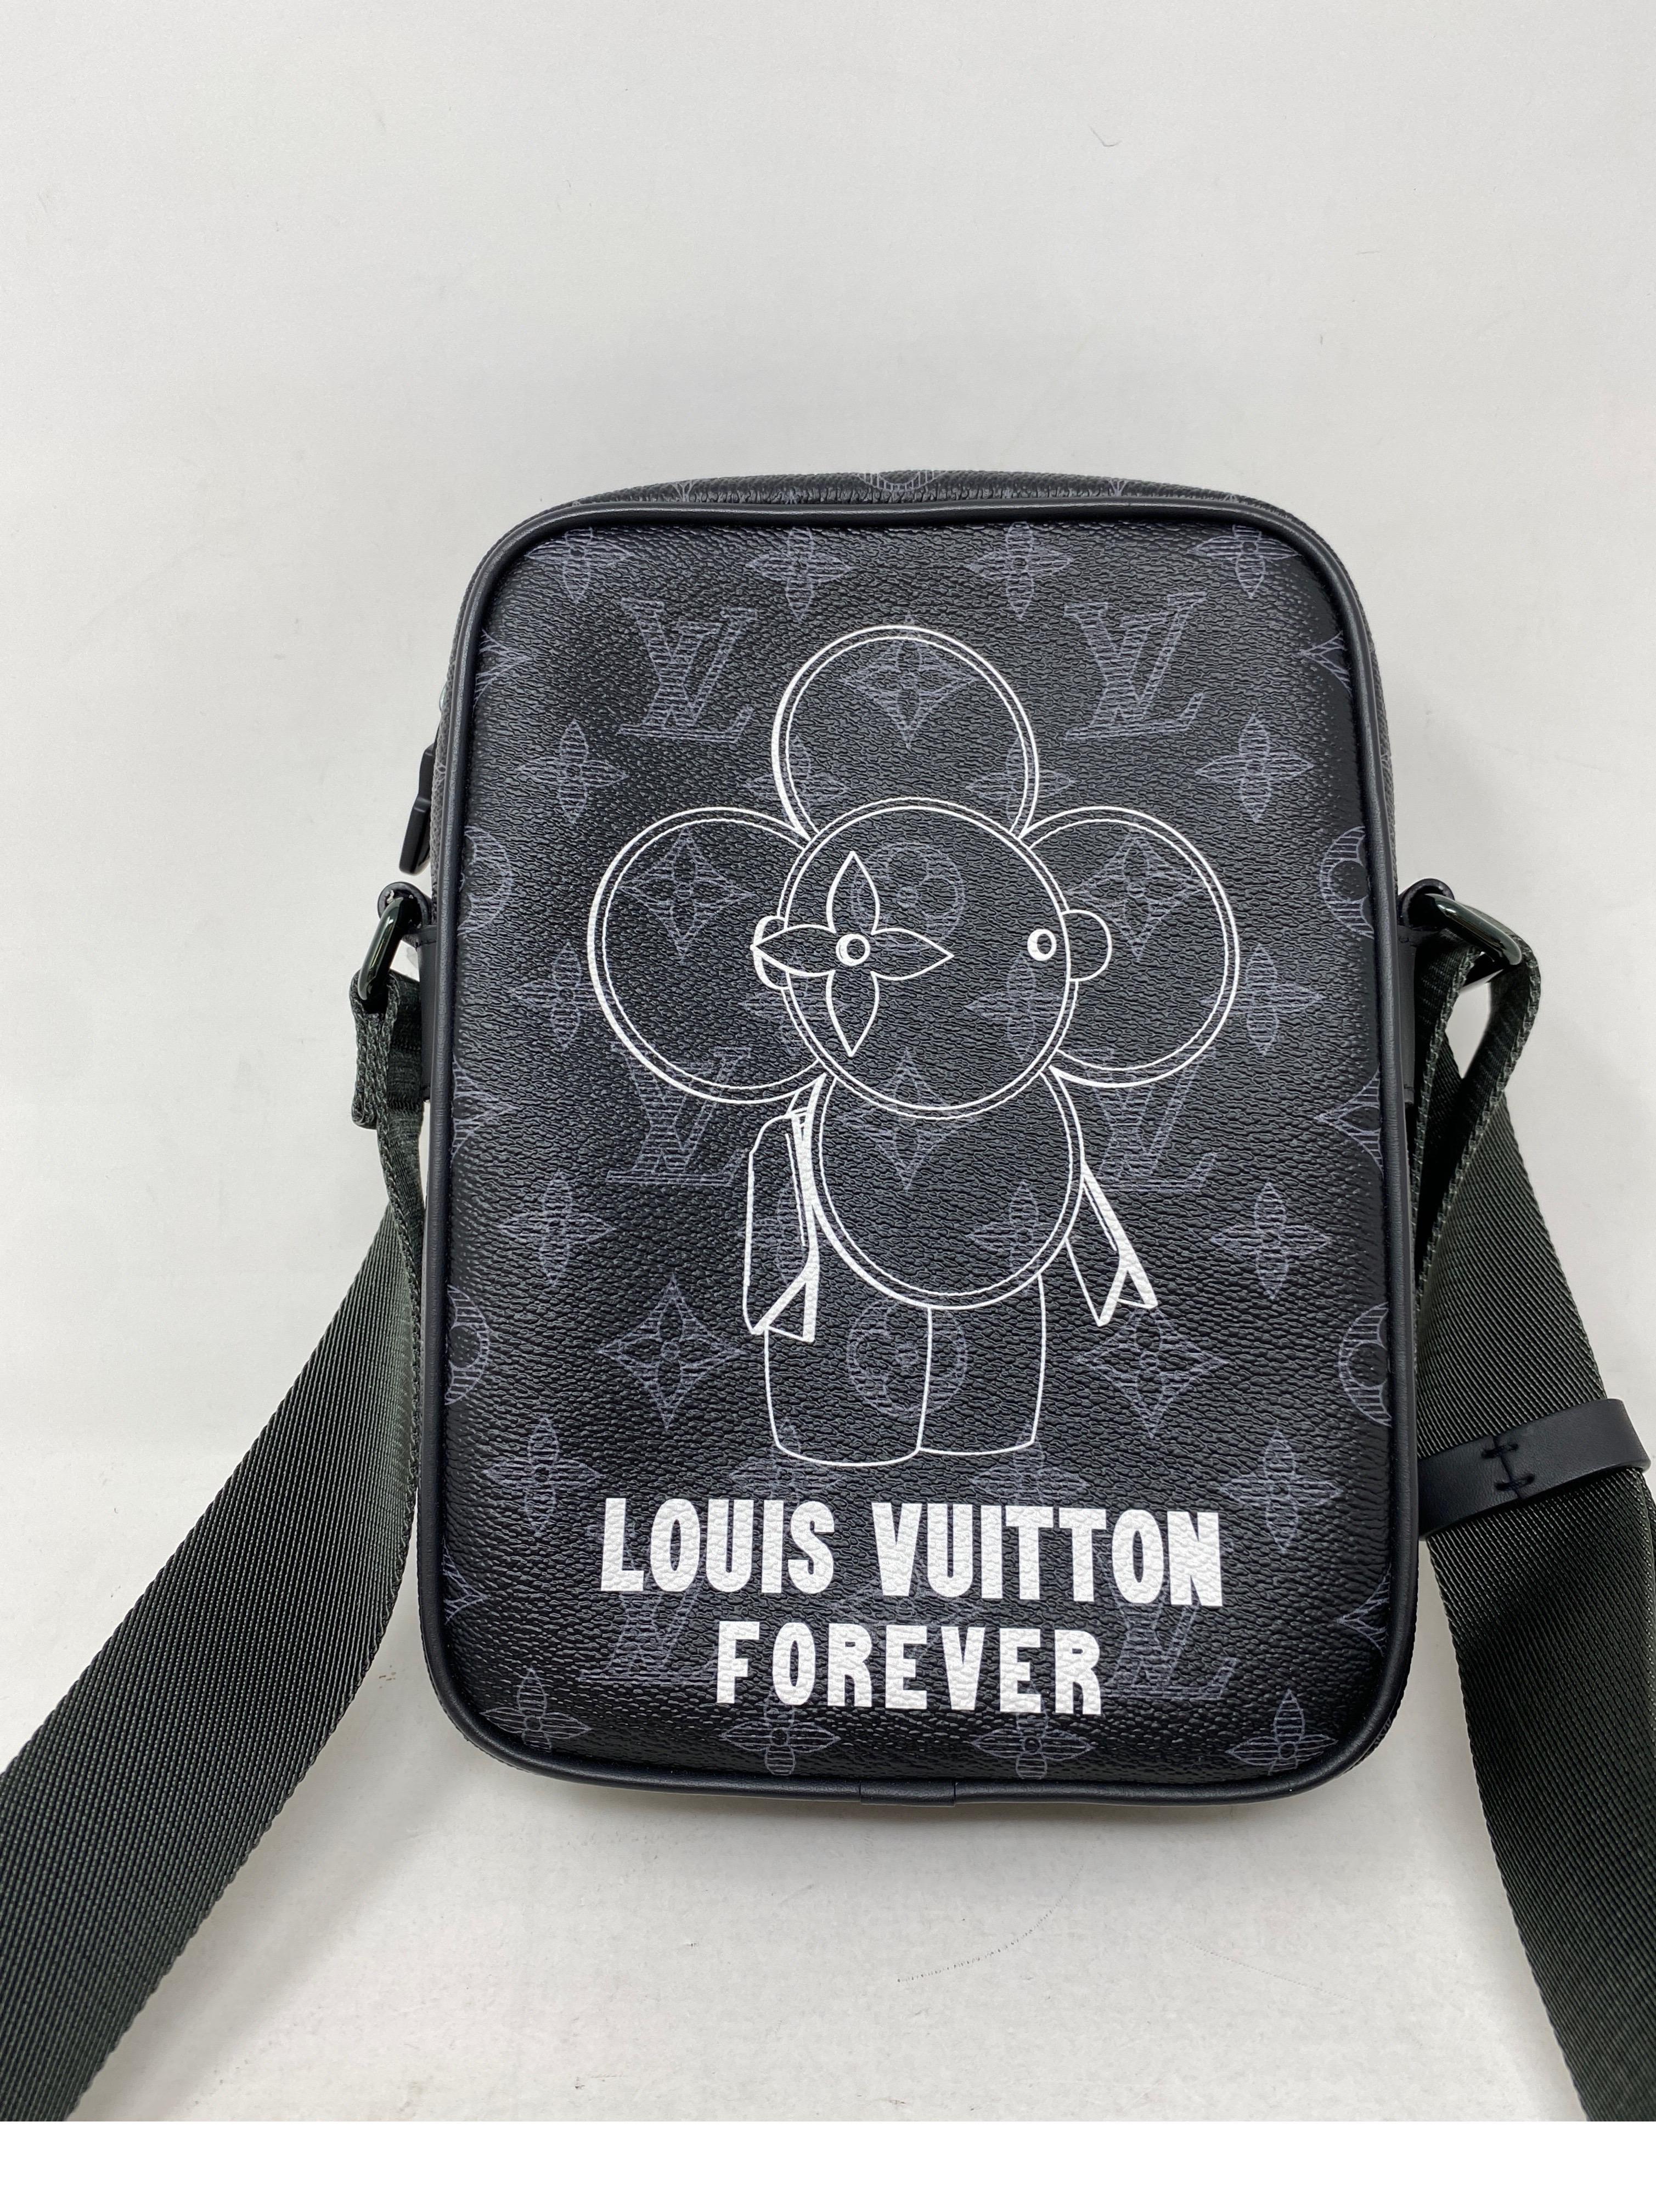 Louis Vuitton Forever Limited Edition Bag. Crossbody or shoulder bag. Adjustable strap. New condition. Never used. Collector's piece. Includes dust cover. Guaranteed authentic. 